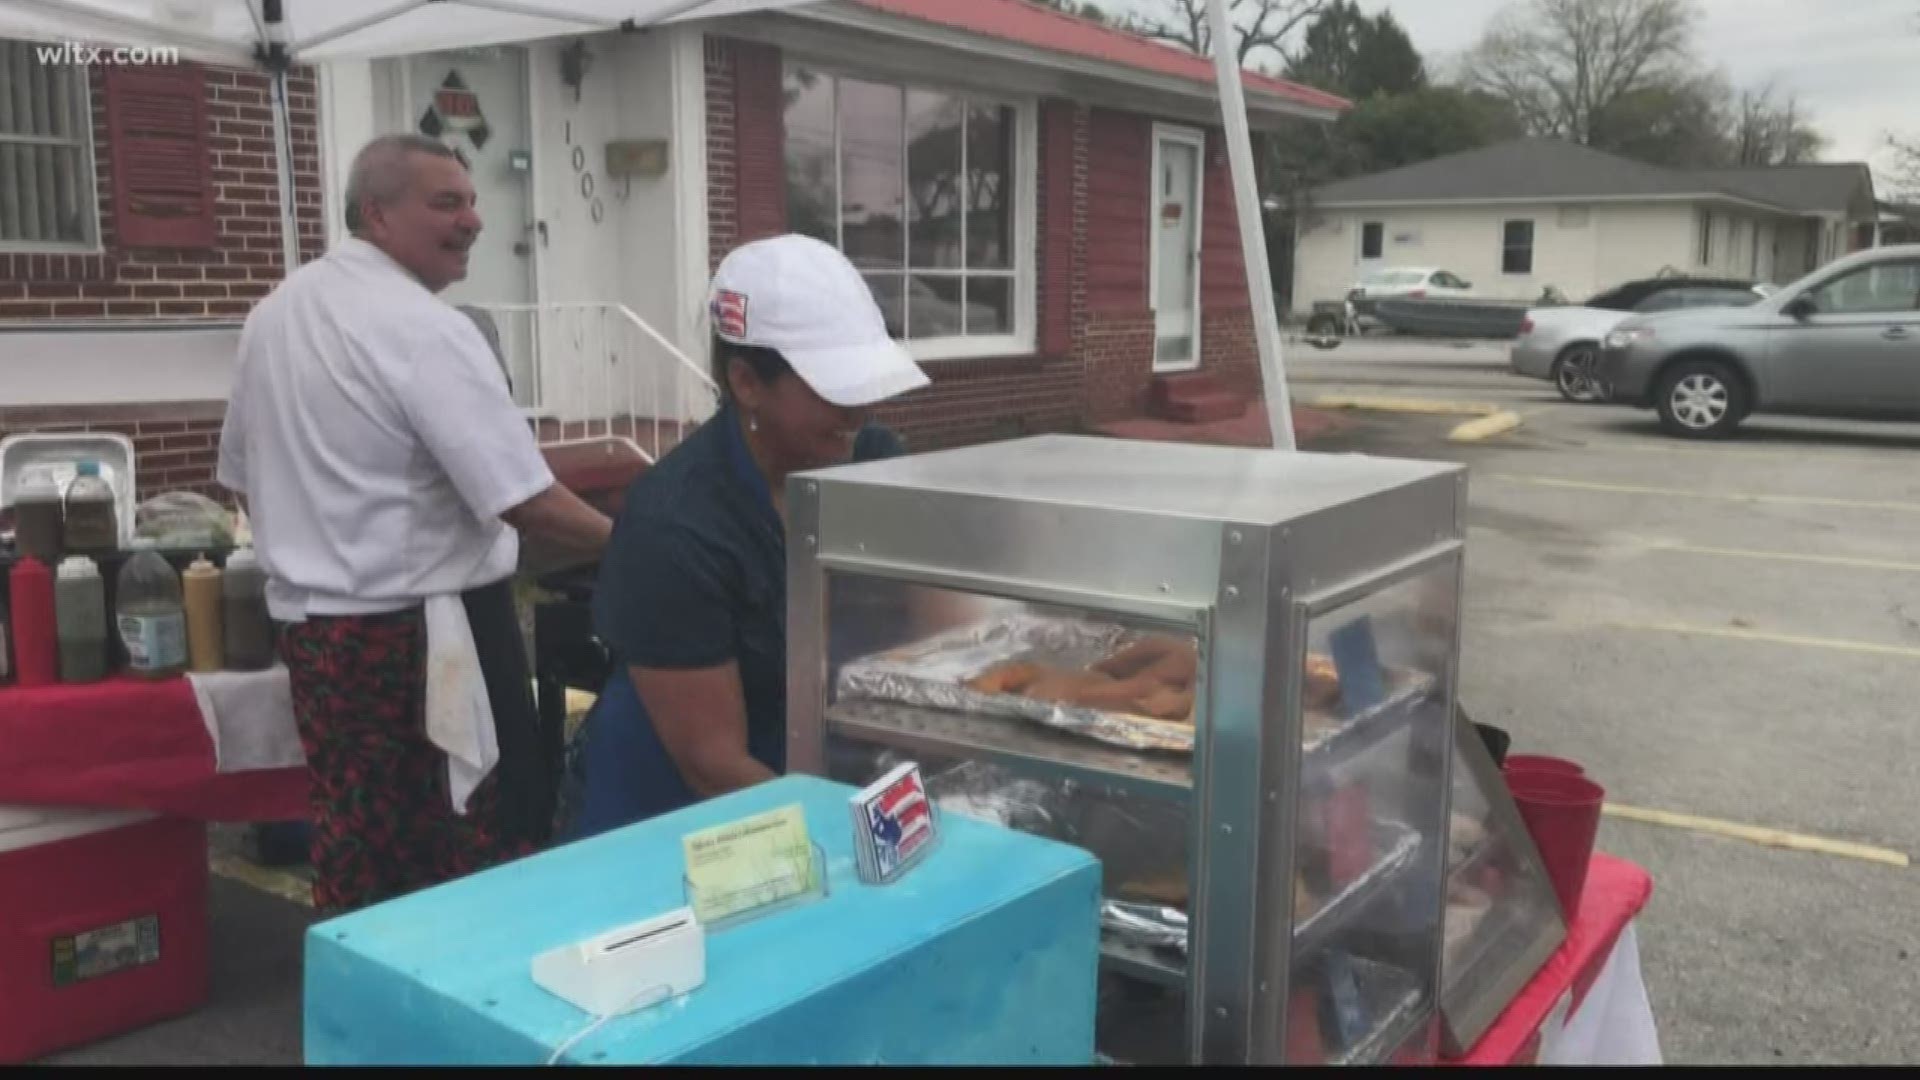 Soda City vendors went to other locations around the city Saturday since Soda City was canceled because of coronavirus concerns